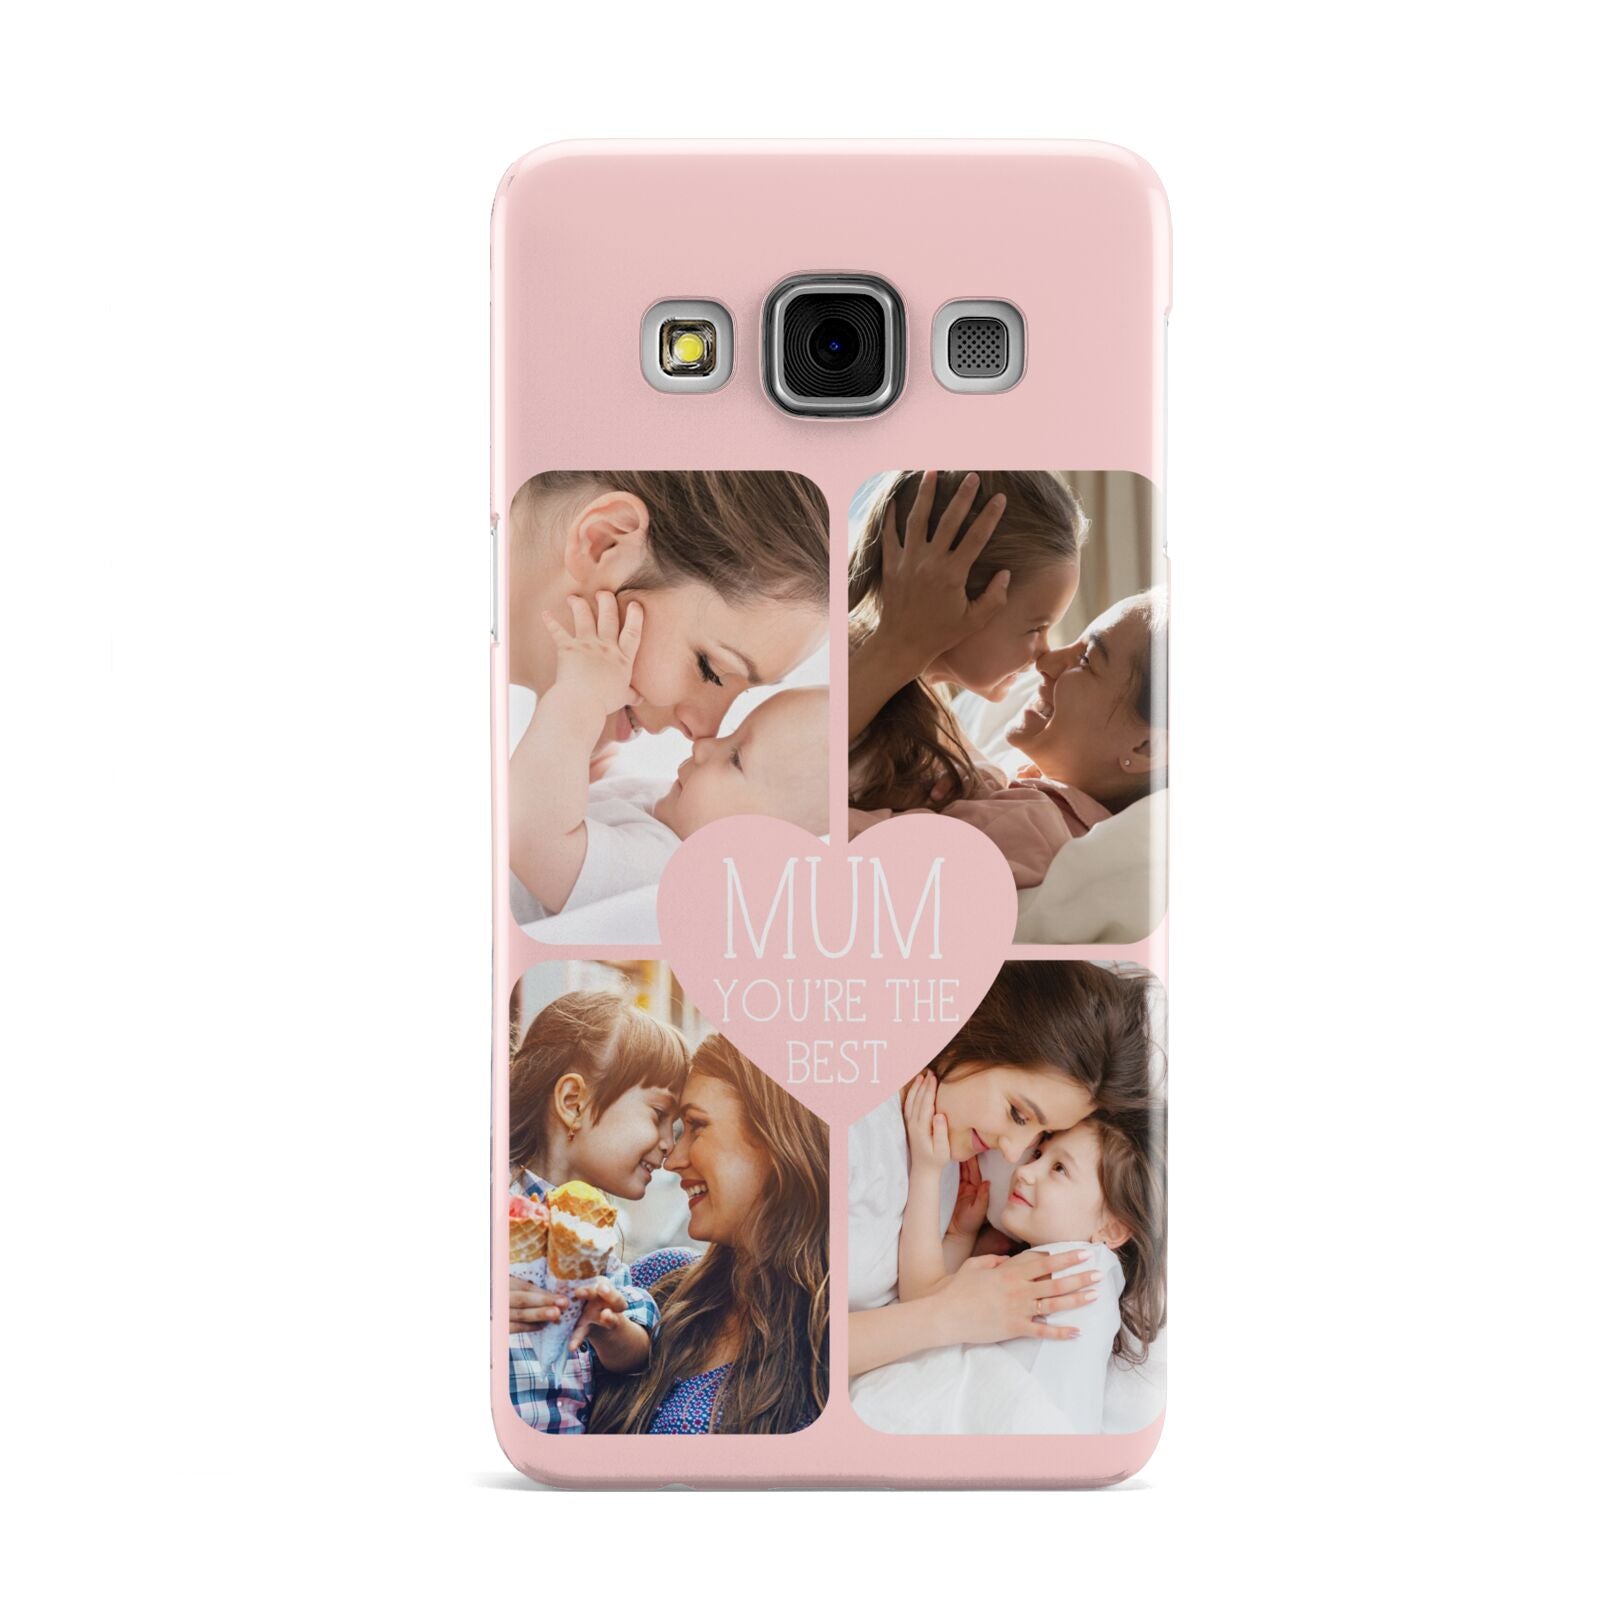 Mothers Day Four Photo Upload Samsung Galaxy A3 Case